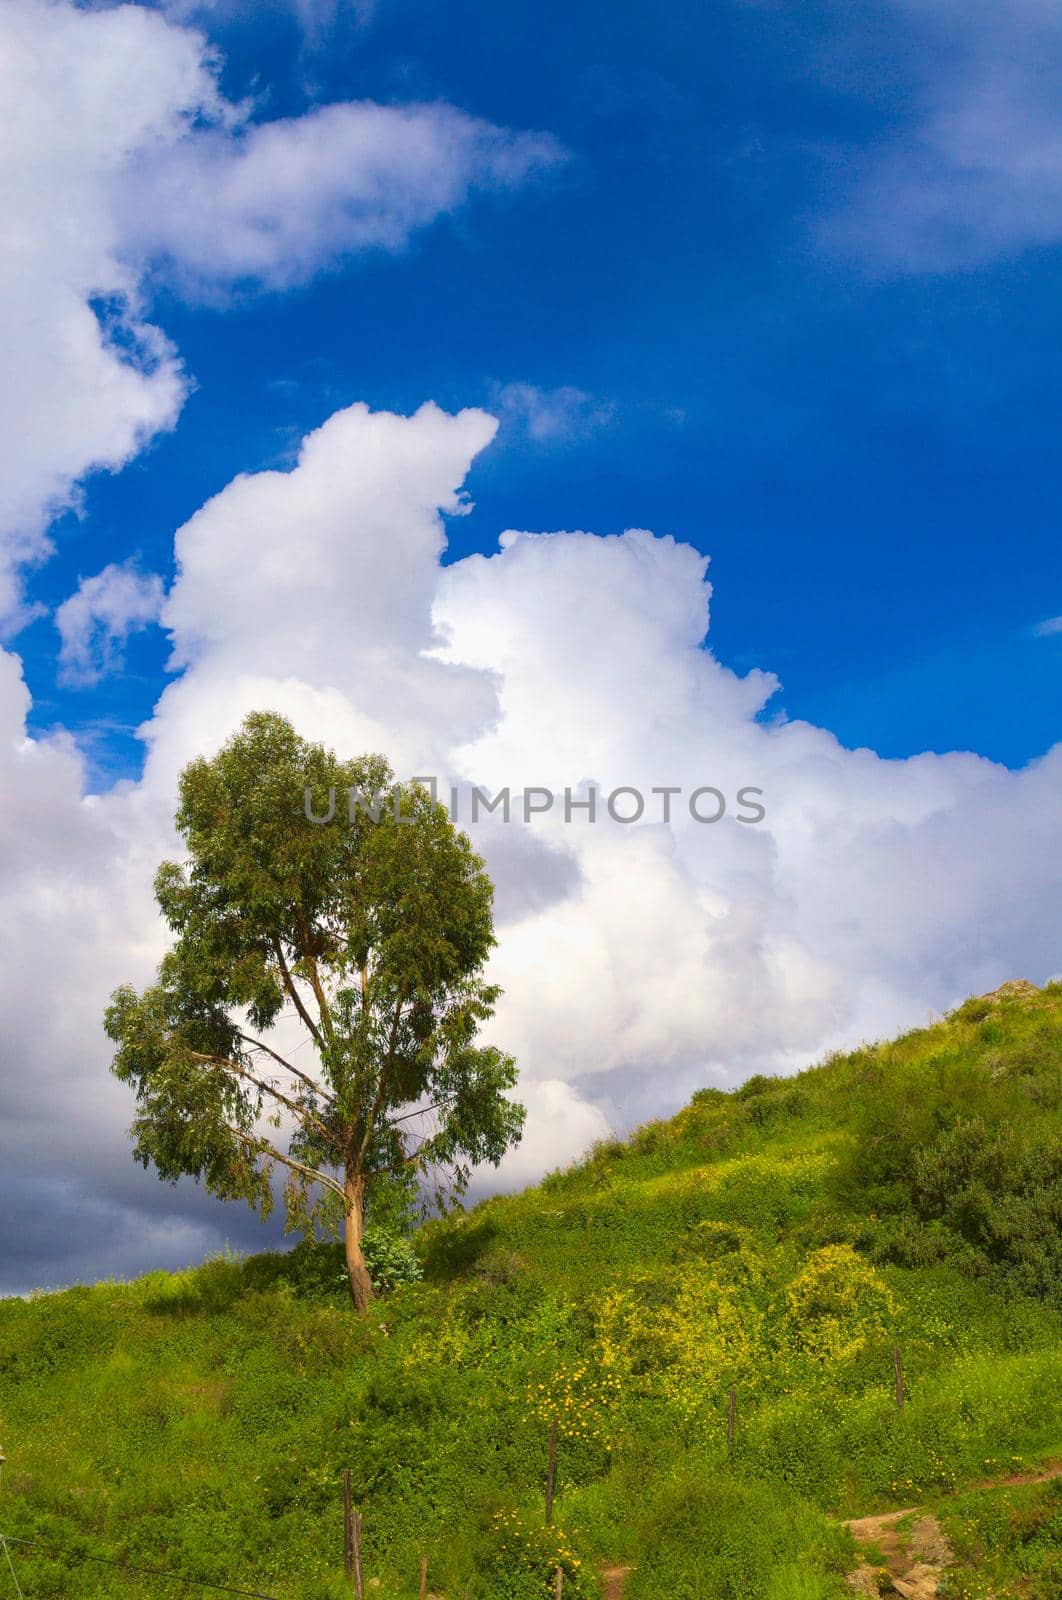 Lone tree against an epic sky full of billowy clouds